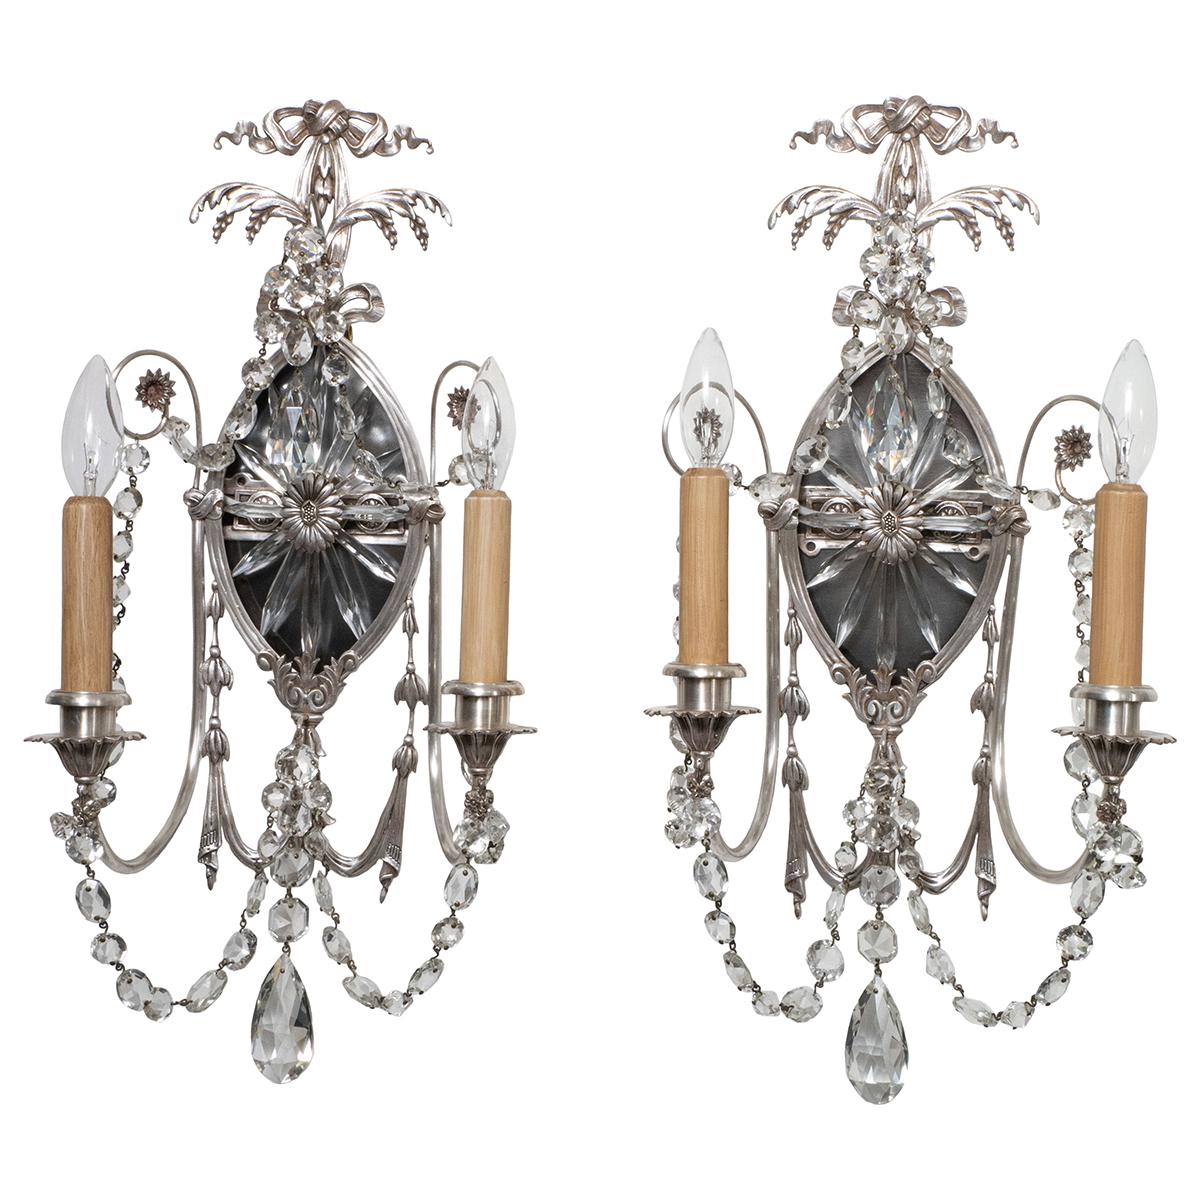 Pair of silvered bronze Caldwell style sconces